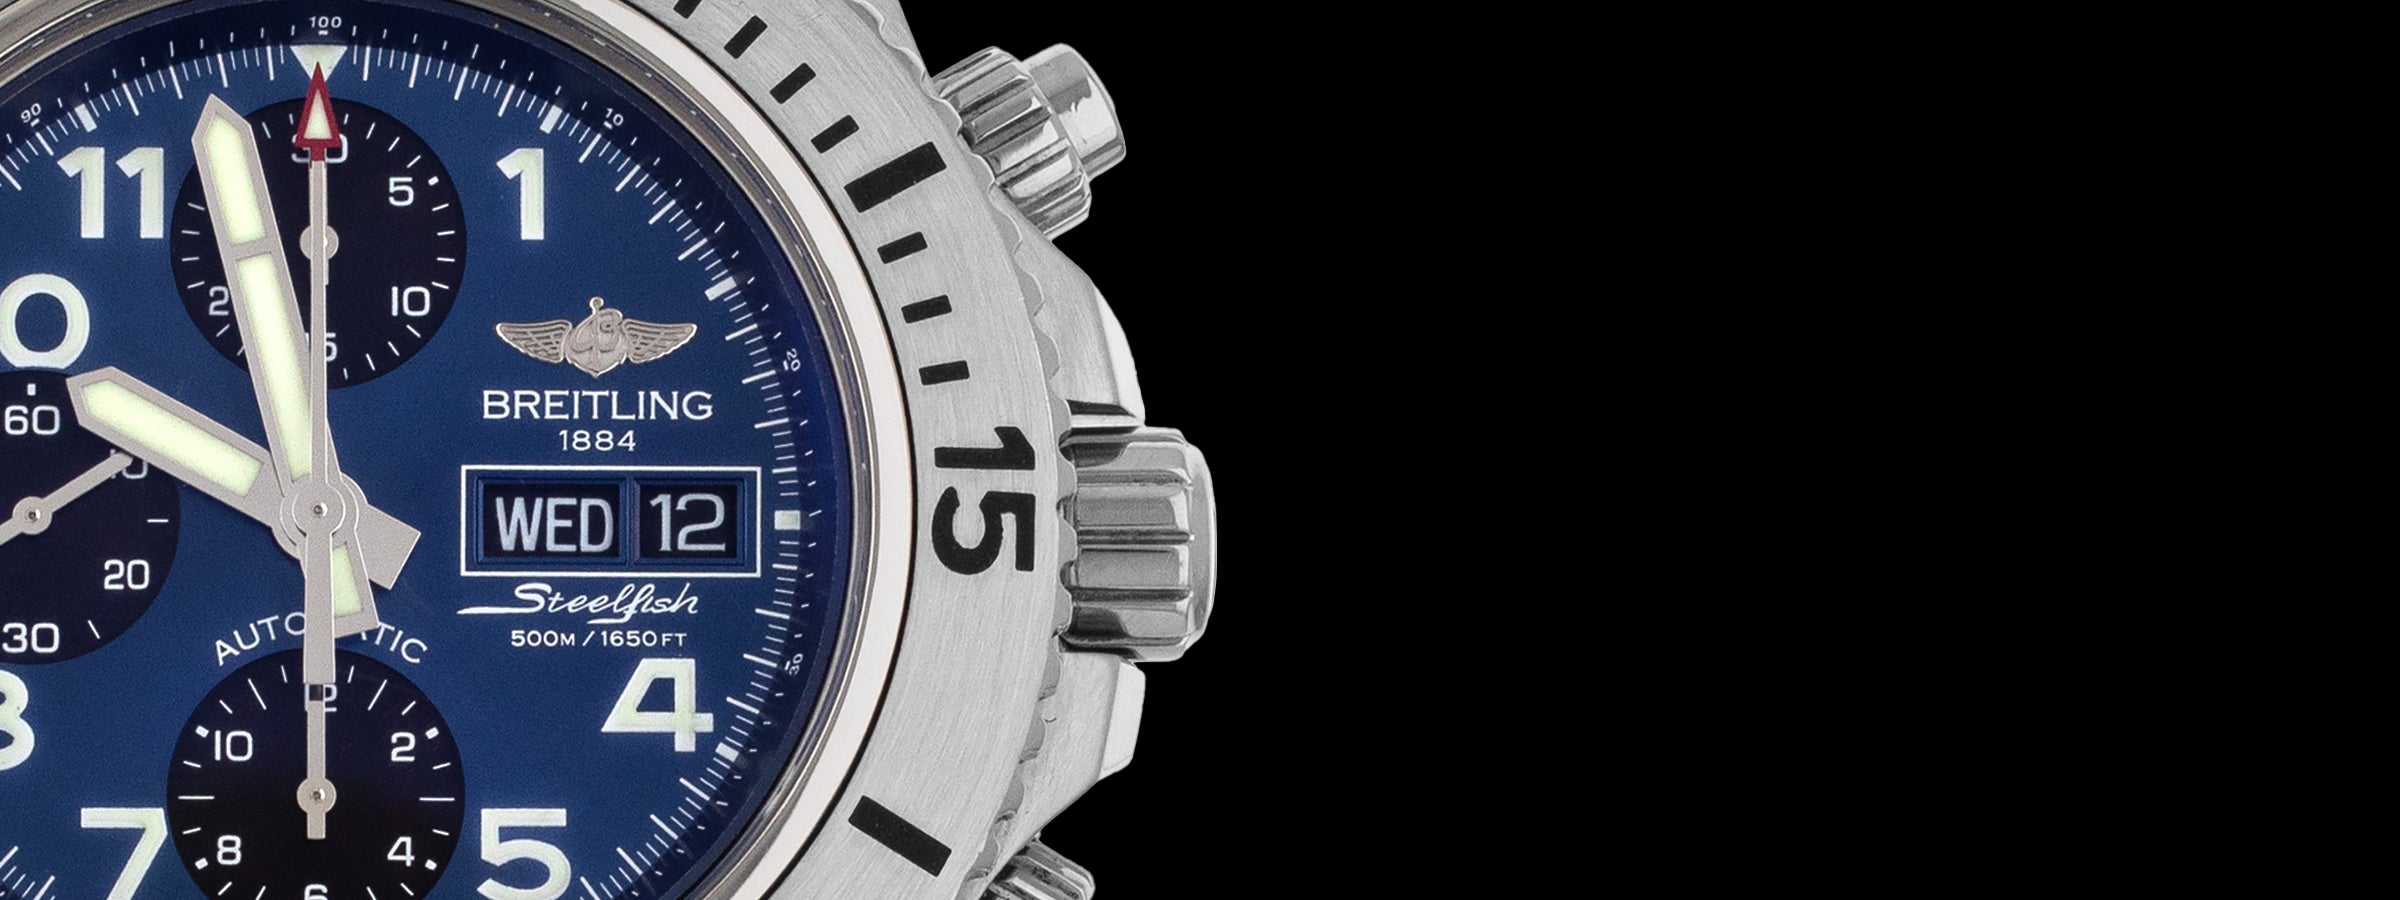 Where to Find Authentic Used Breitling Watches for Sale